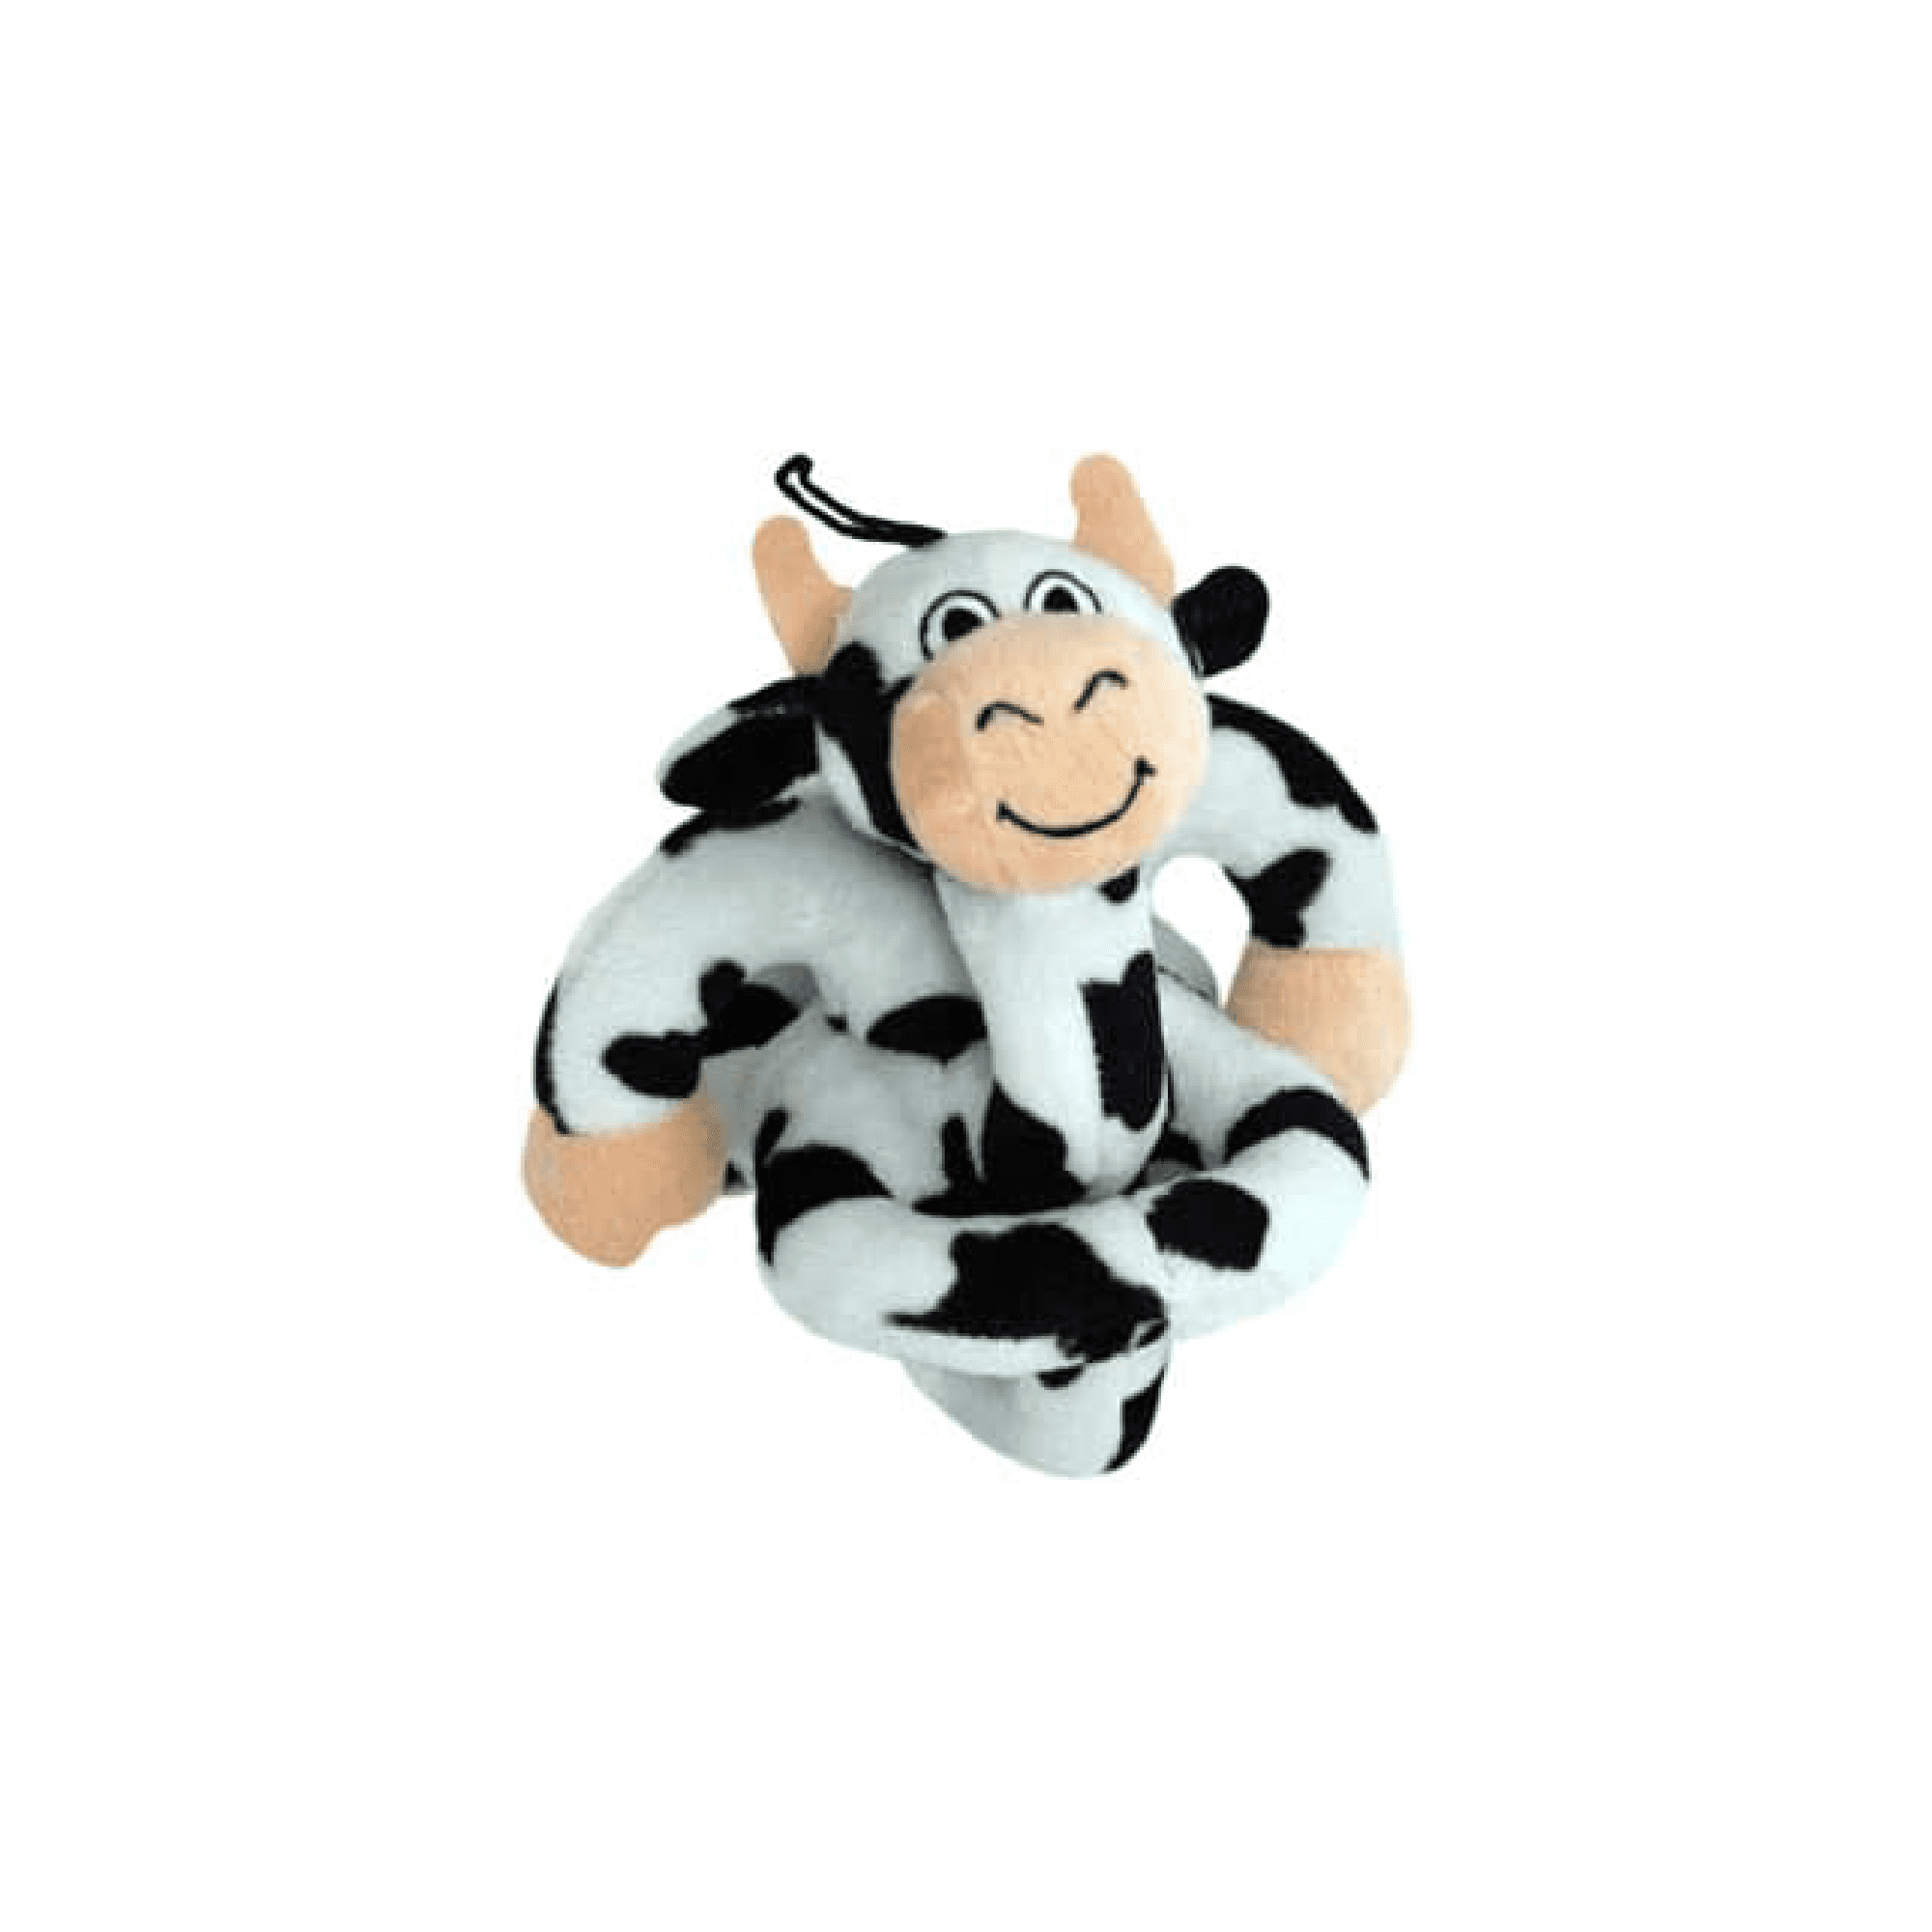 Loopies Talking / Sound Chip Toy Black & White Cow » Dogfather and Co. |  Dog Grooming and Retail in Toronto